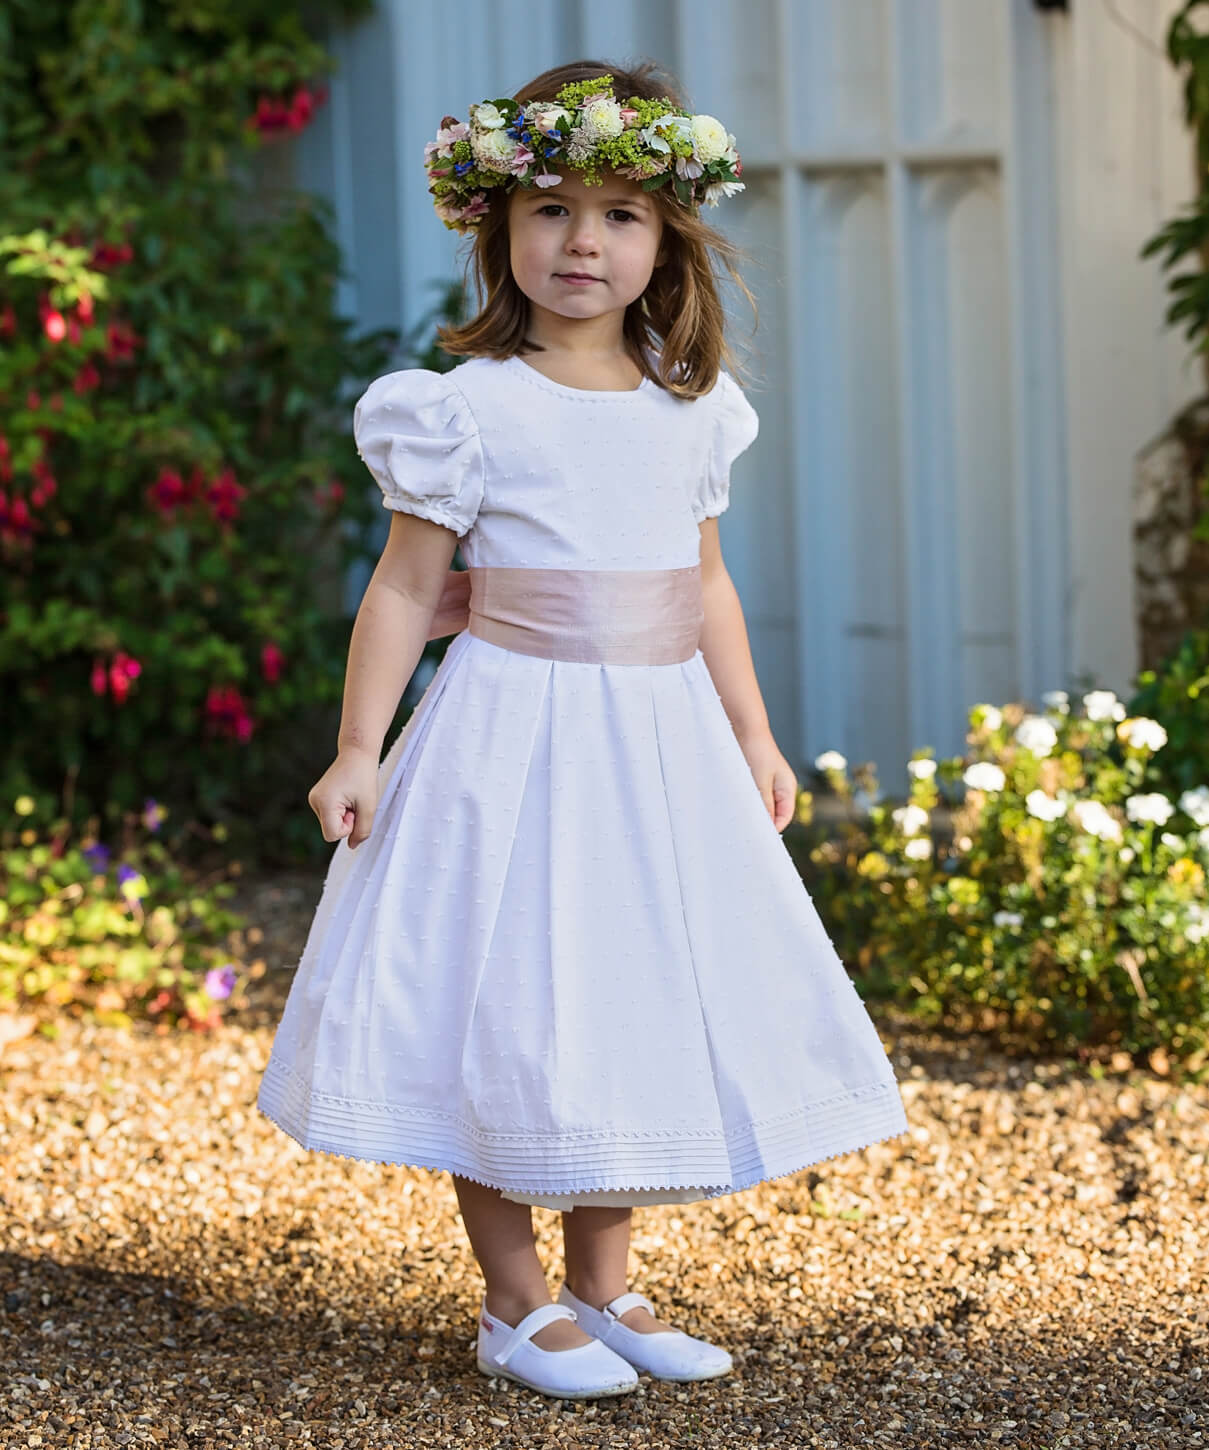 6 Cute Ways to Ask Your Flower Girl to Be Part of the Wedding